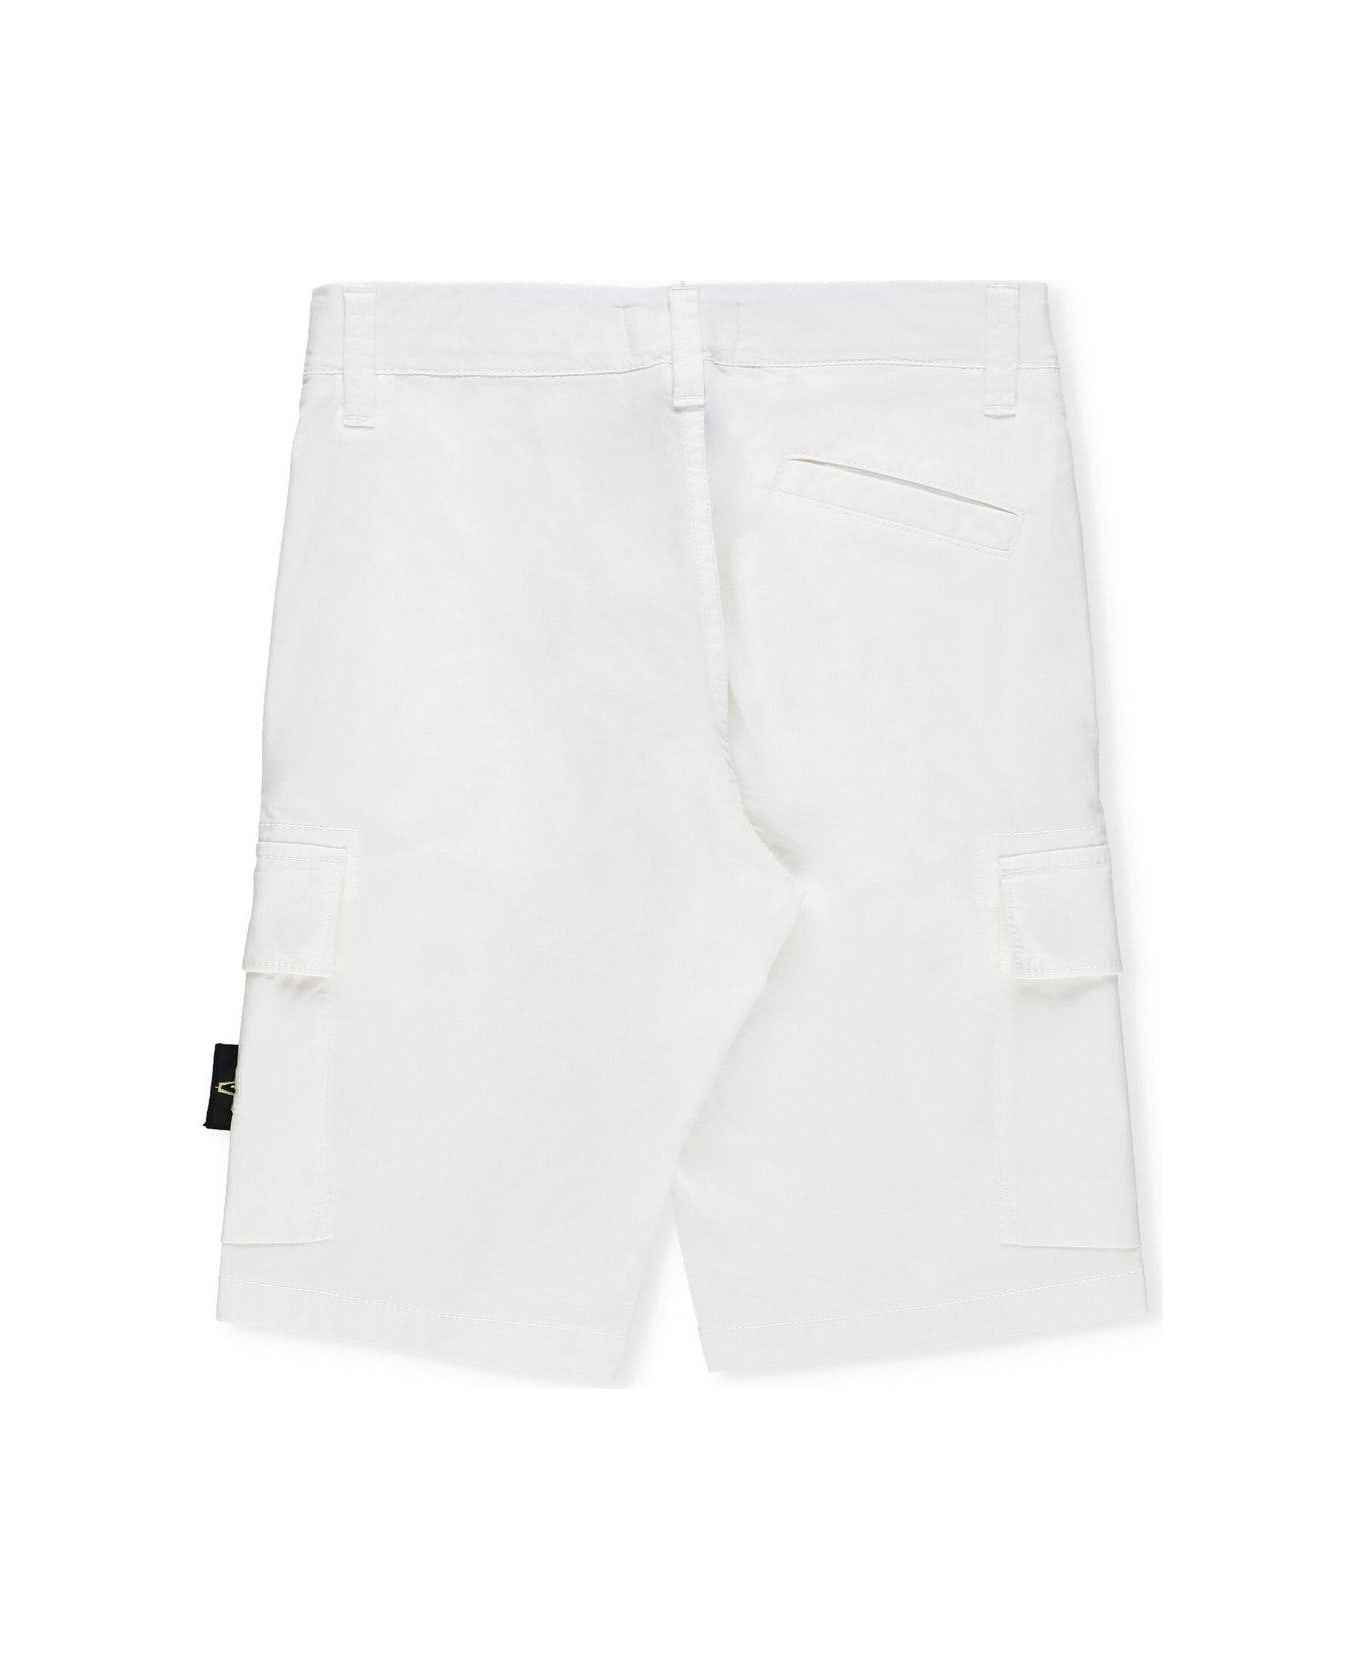 Stone Island Compass Patch Knee-length Cargo Shorts - Bianco ボトムス